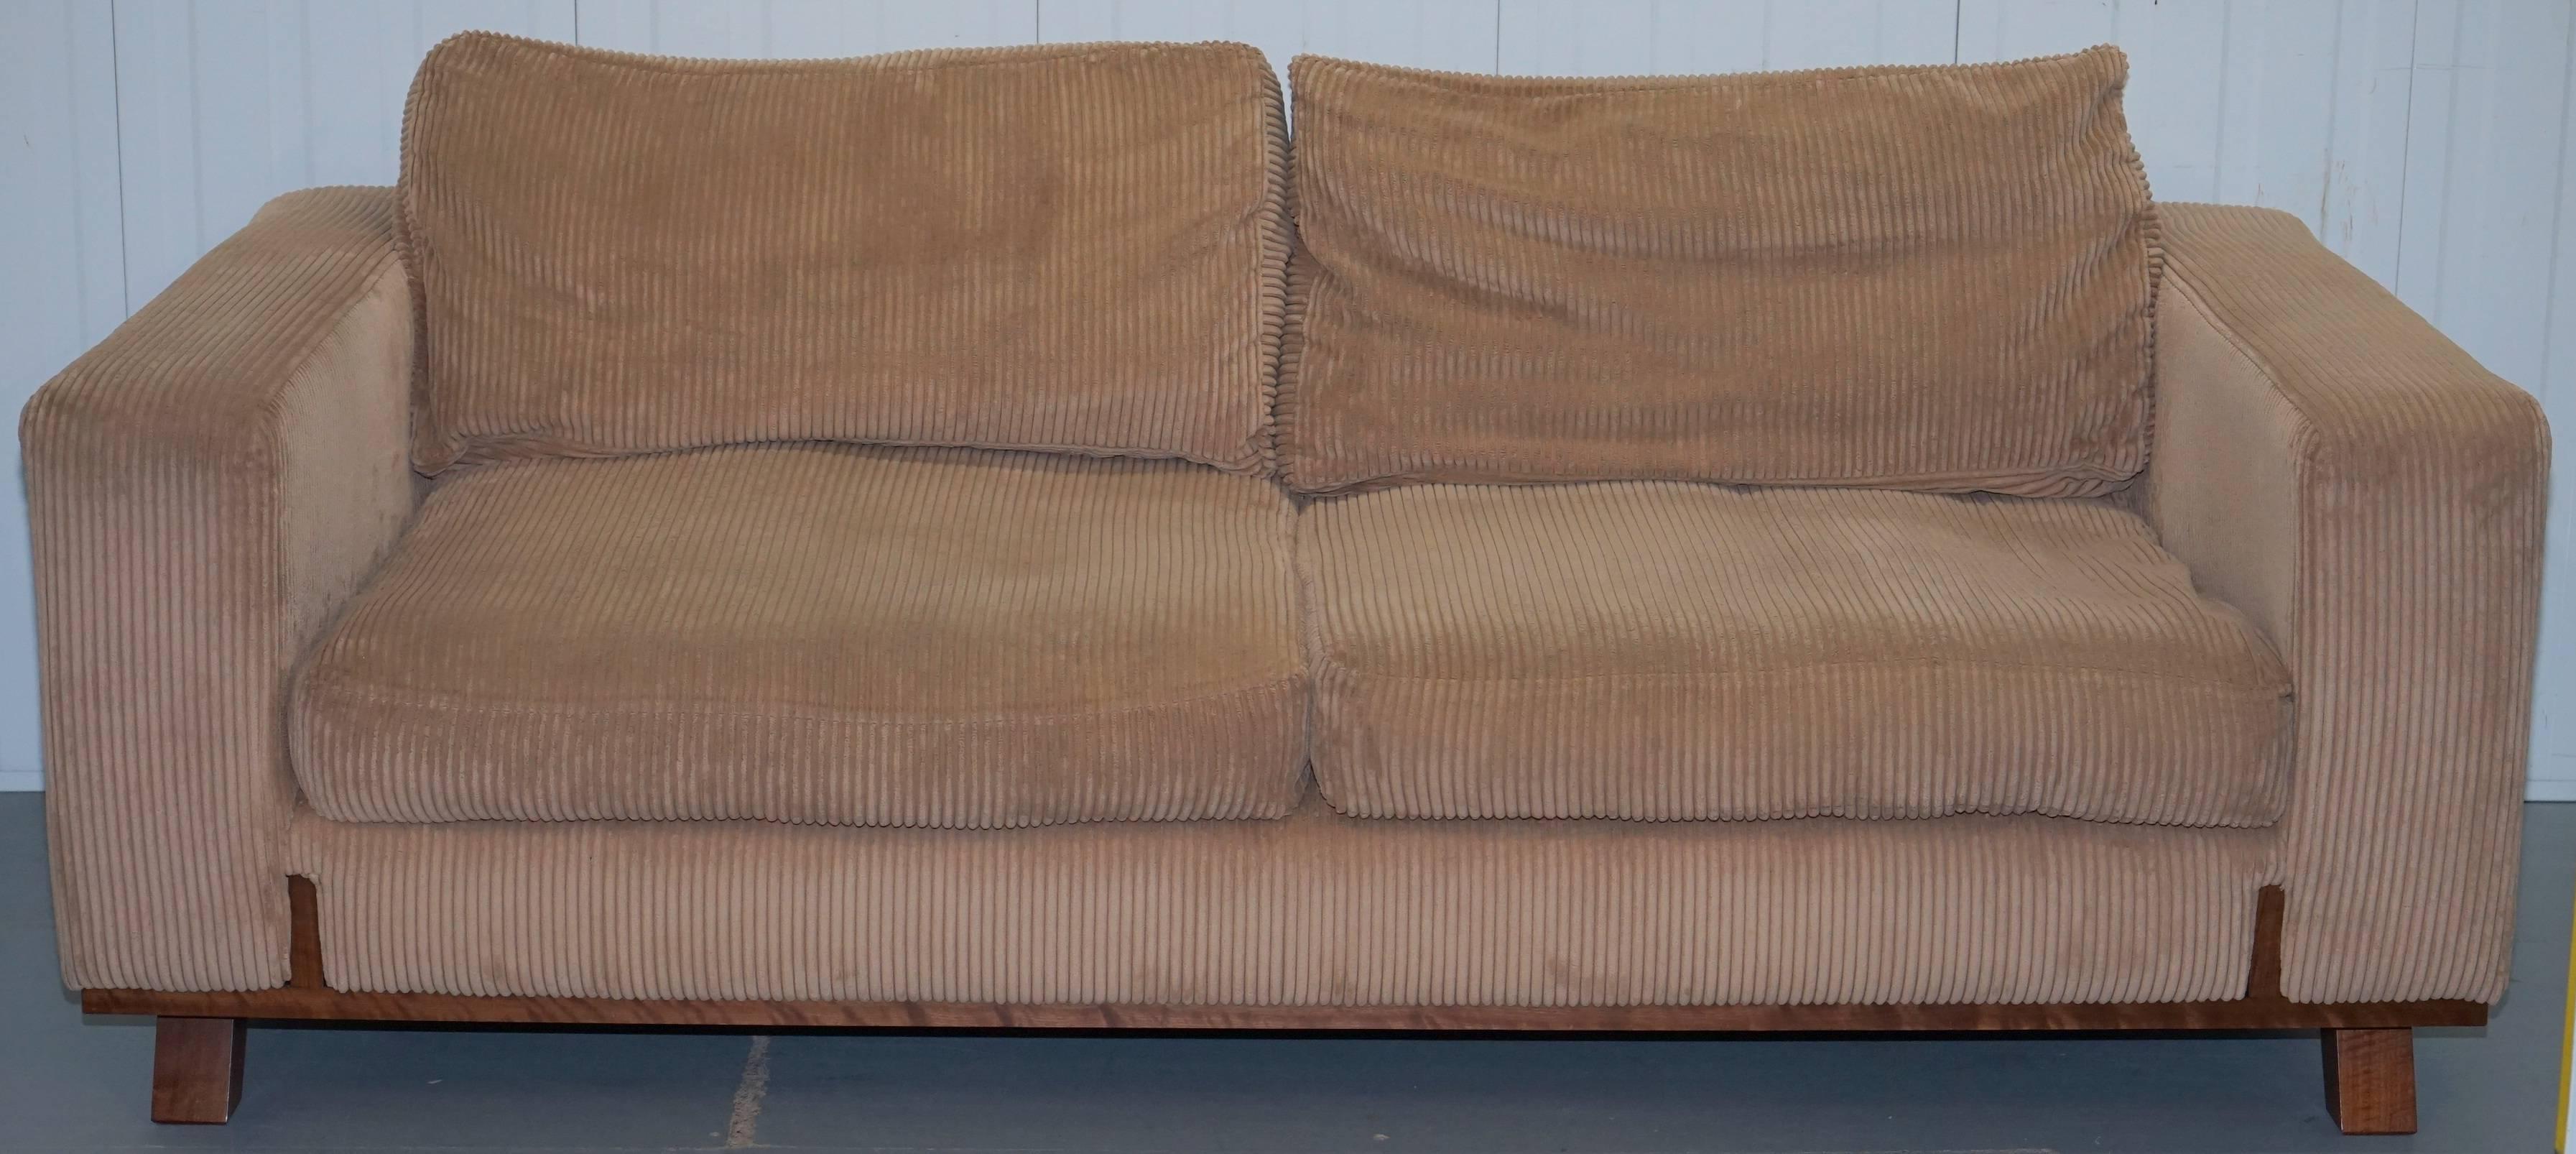 Stunning fully stamped original David Linley walnut framed feather filled cushions Dunwick sofa.

Please note the delivery fee listed is just a guide, for an accurate quote please send me your postcode and I’ll price it up for you.

If money were no